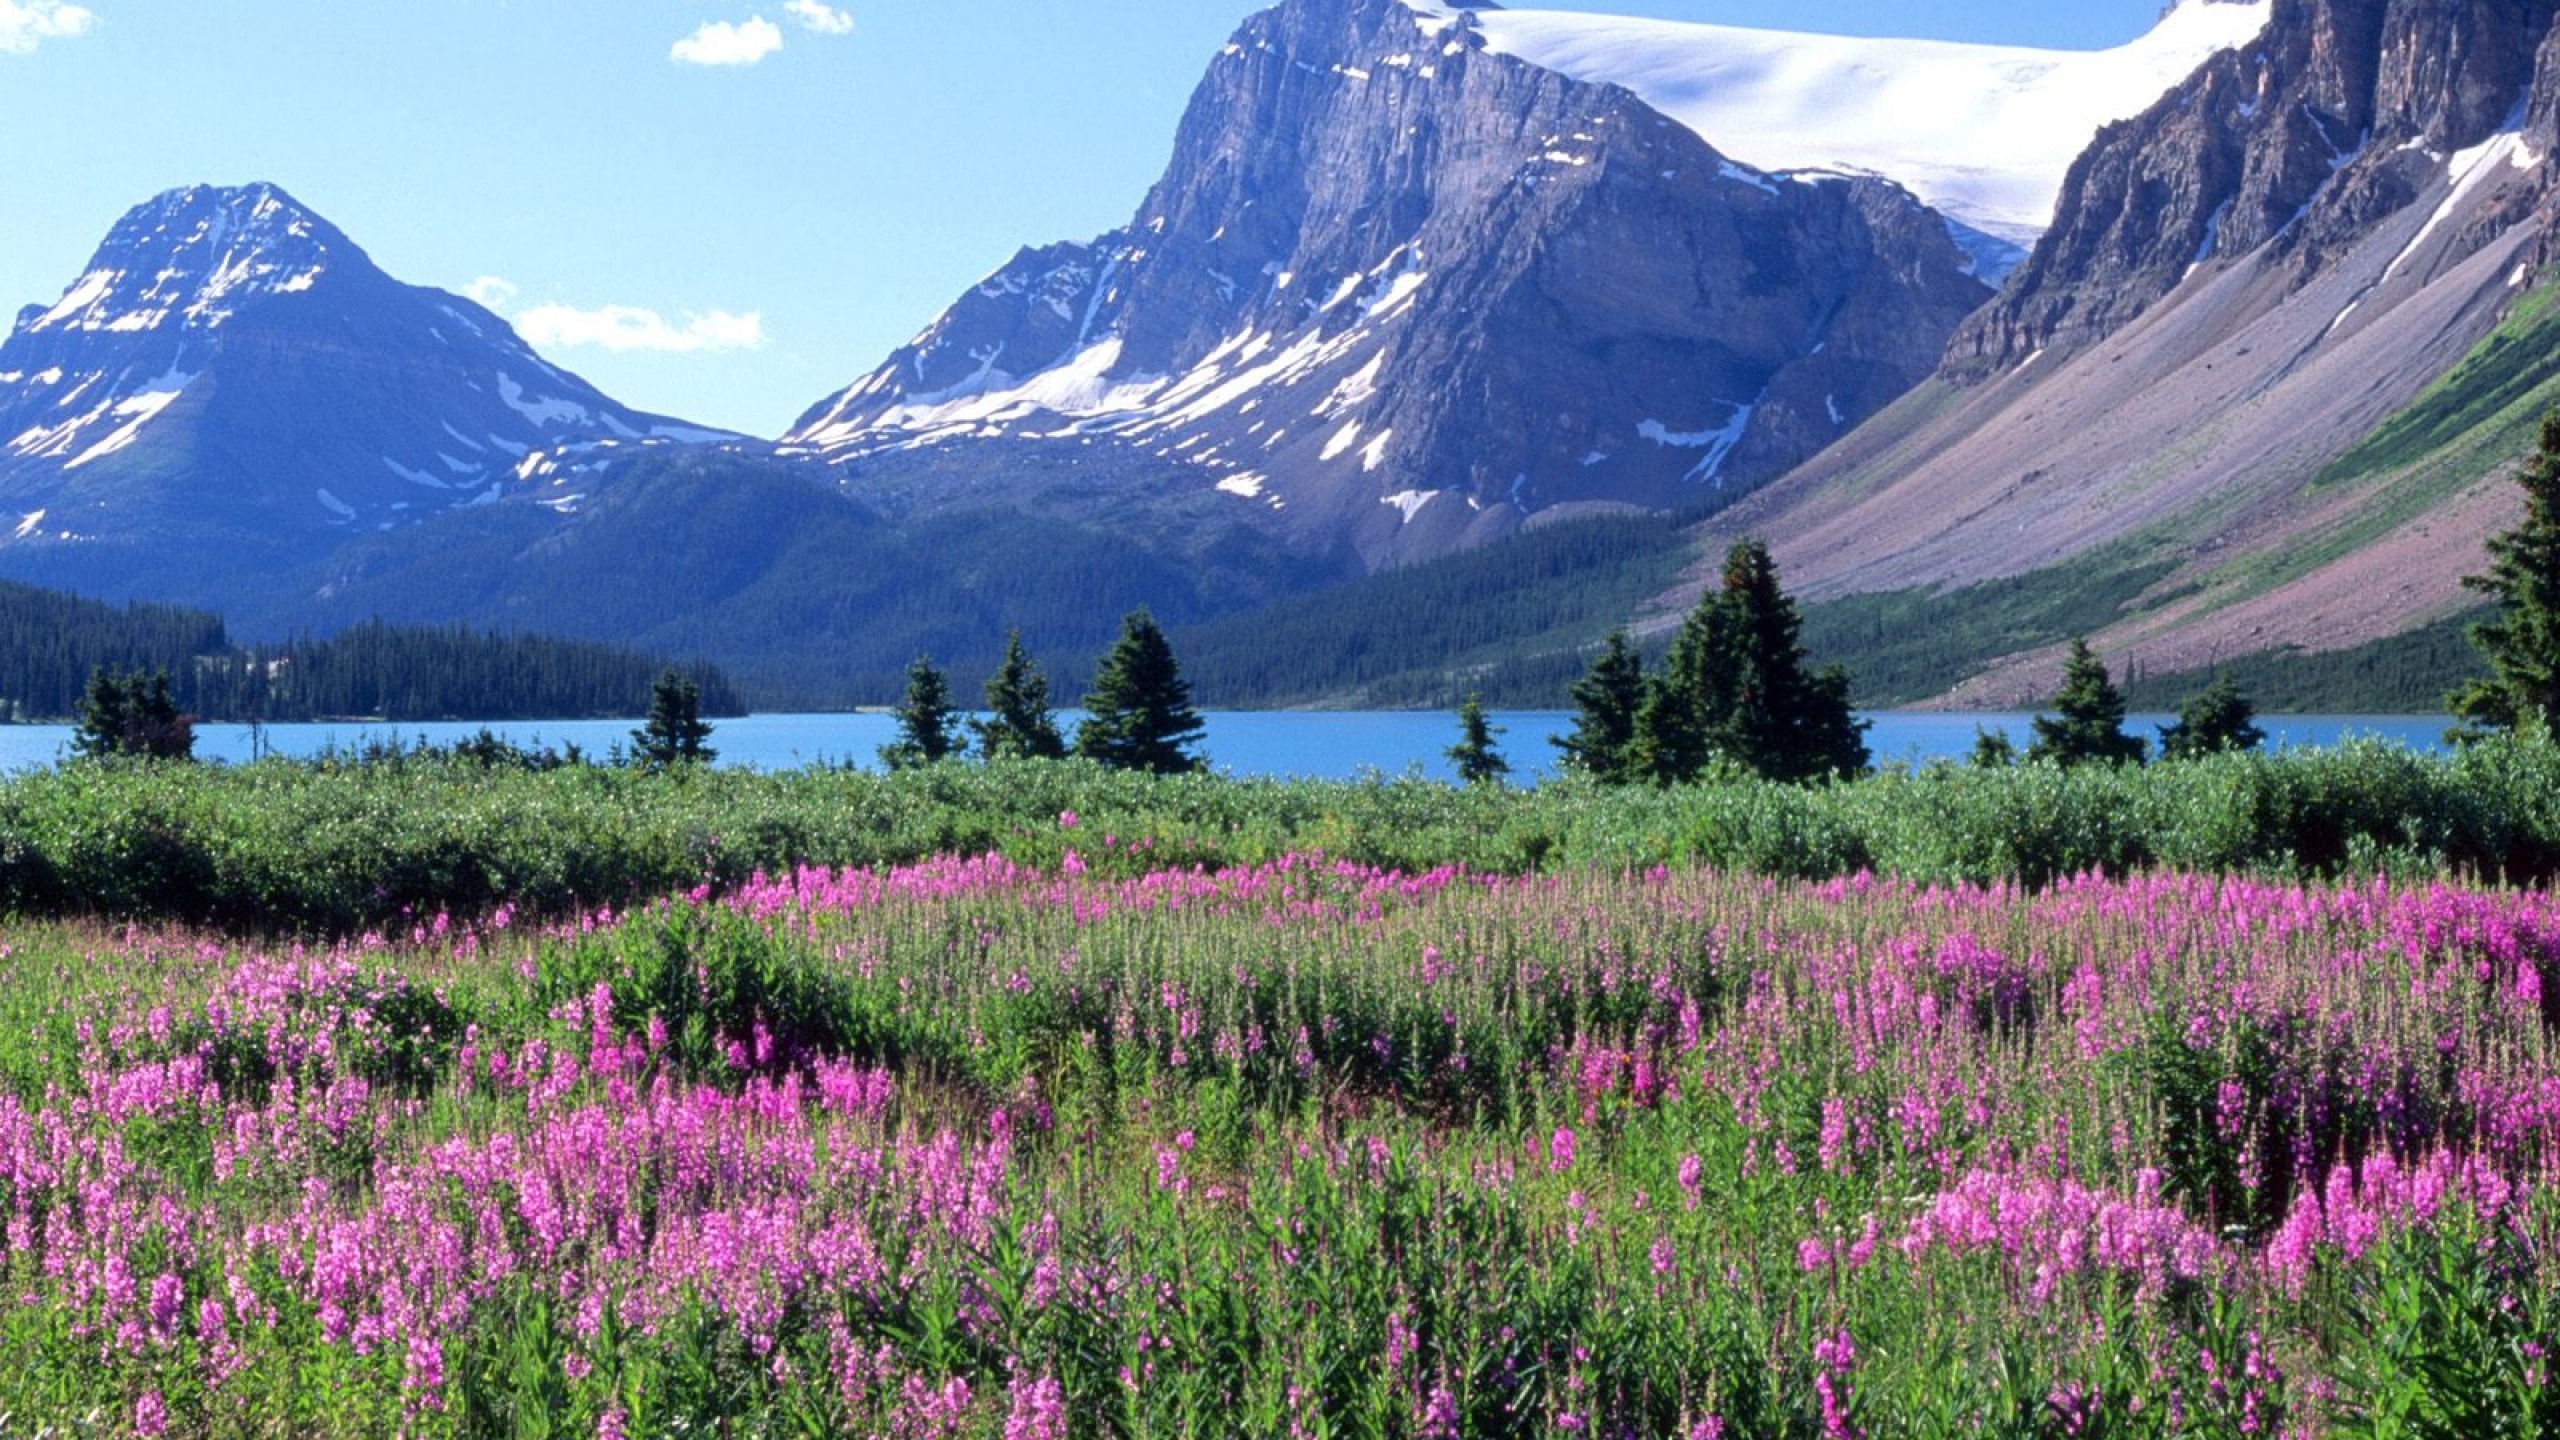 Wallpaper Mountains Trees Flowers Lake Canada